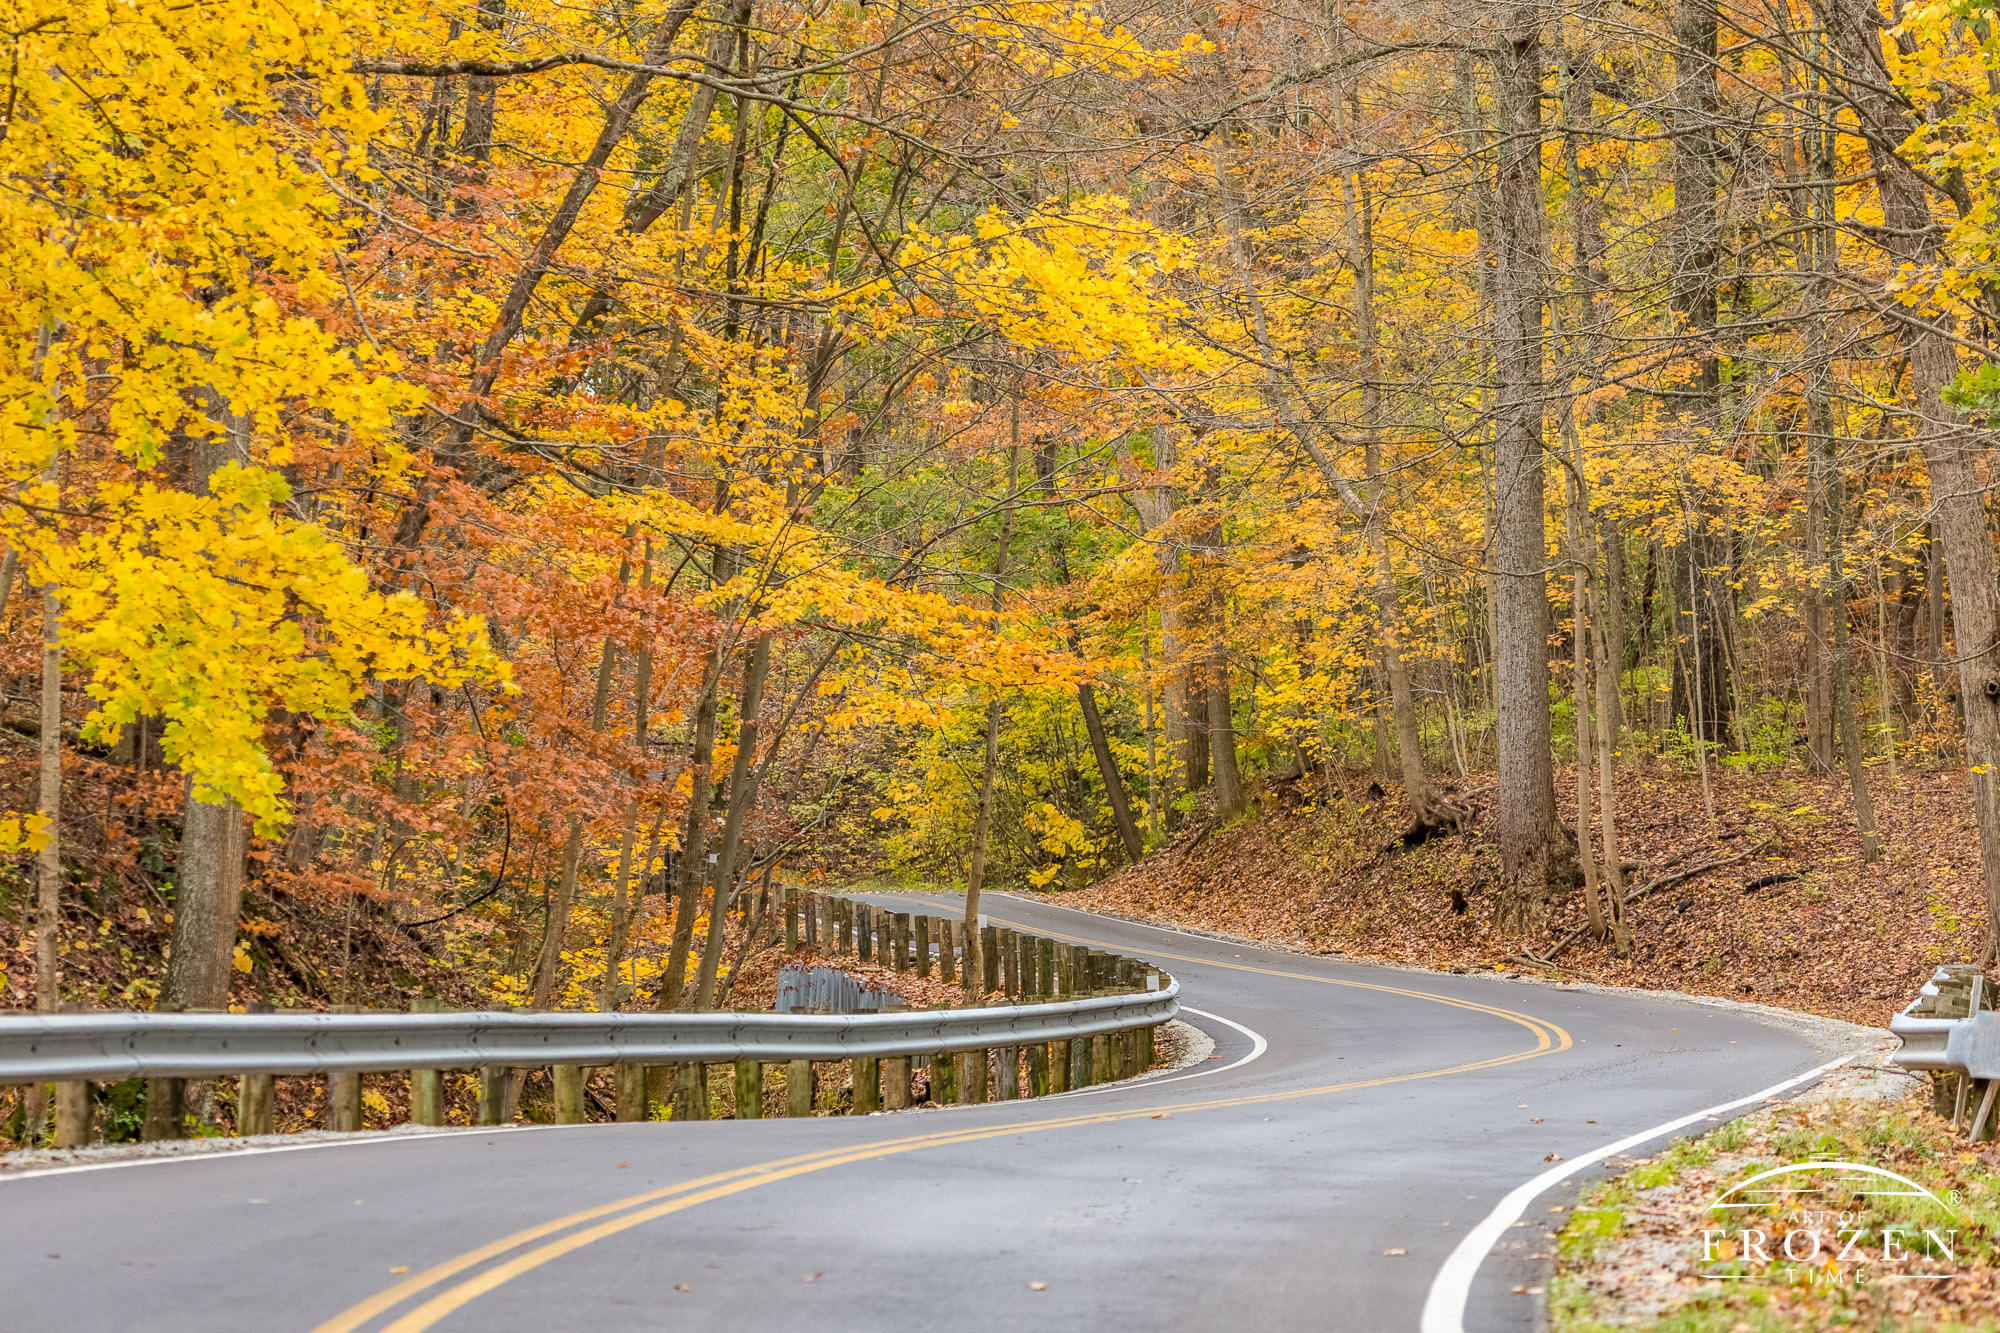 A winding road passes through a forest of sugar maple leaves displaying their fall colors